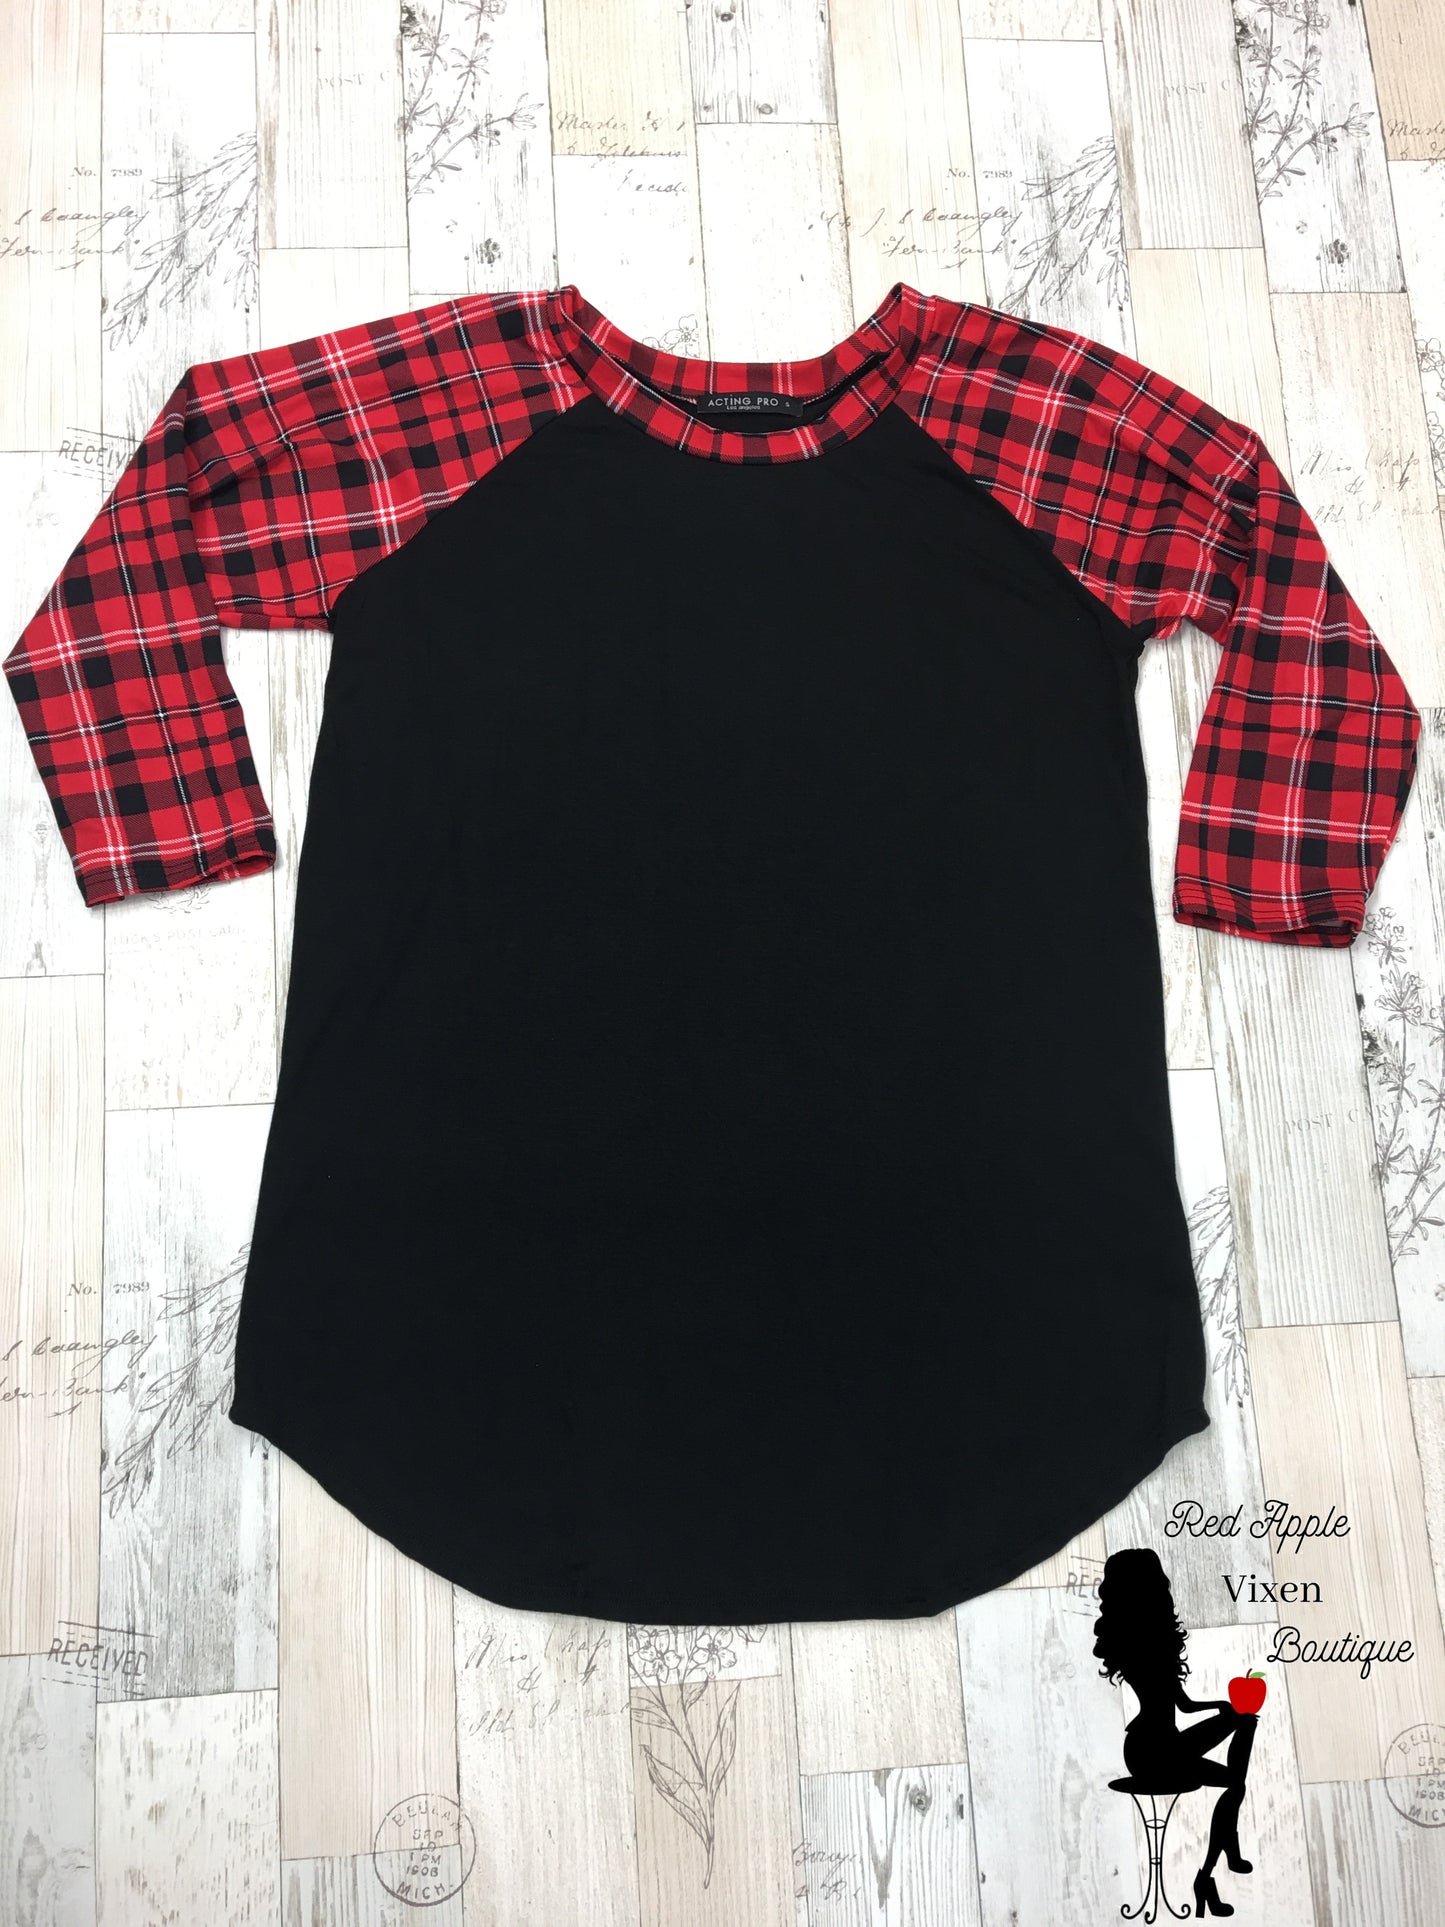 Long Sleeve Red and Black Plaid Tunic - Red Apple Vixen Boutique